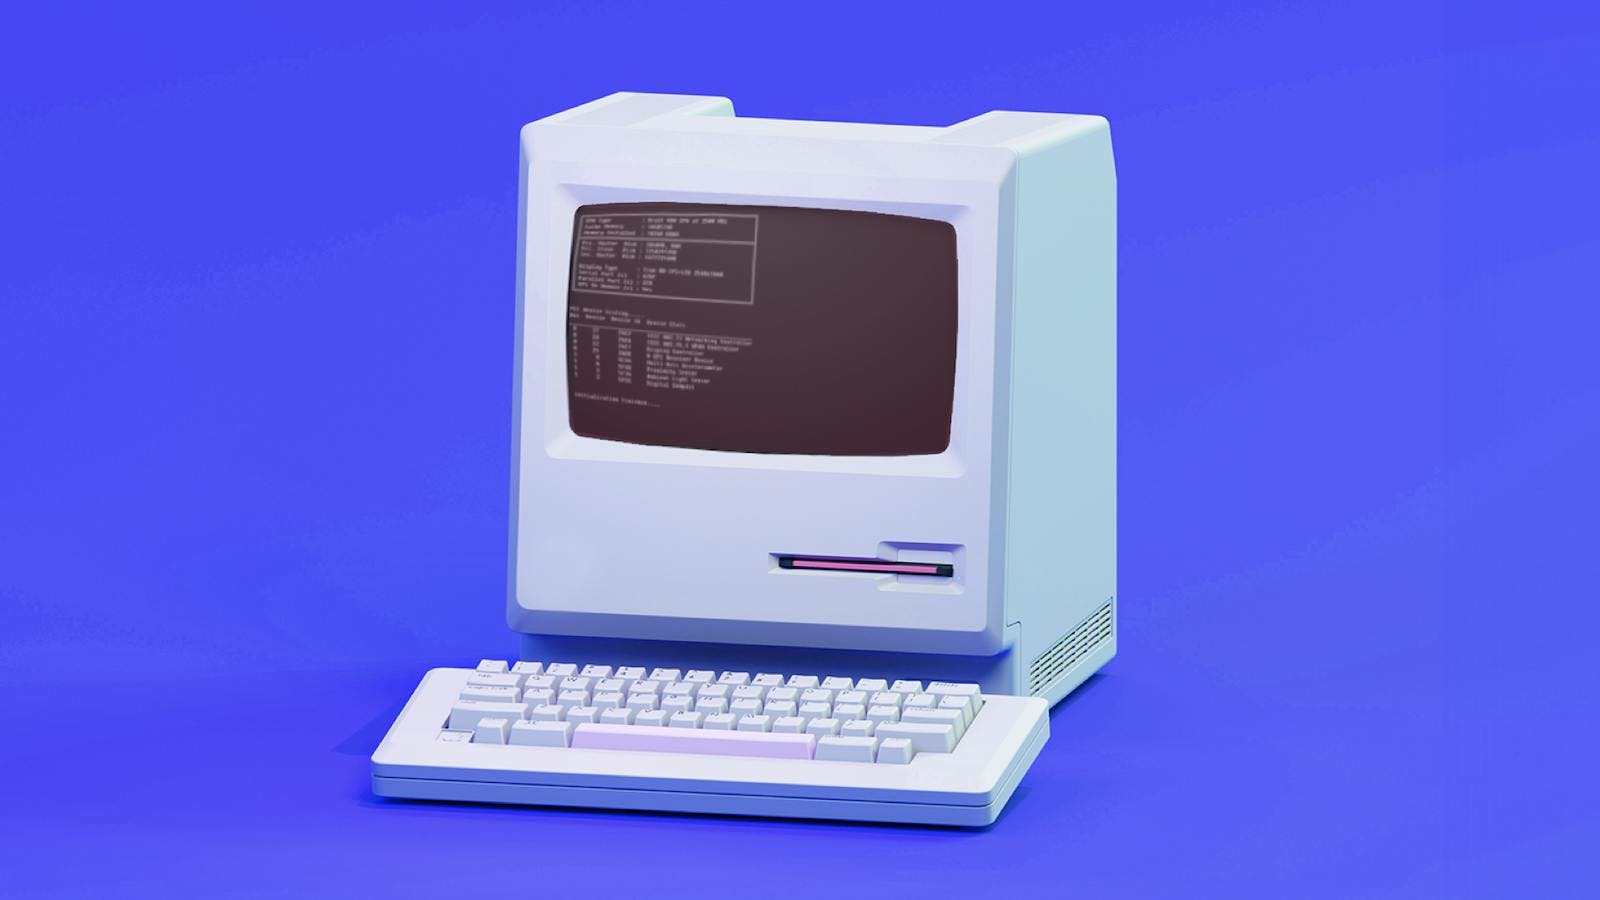 A simple graphic picture of an old computer